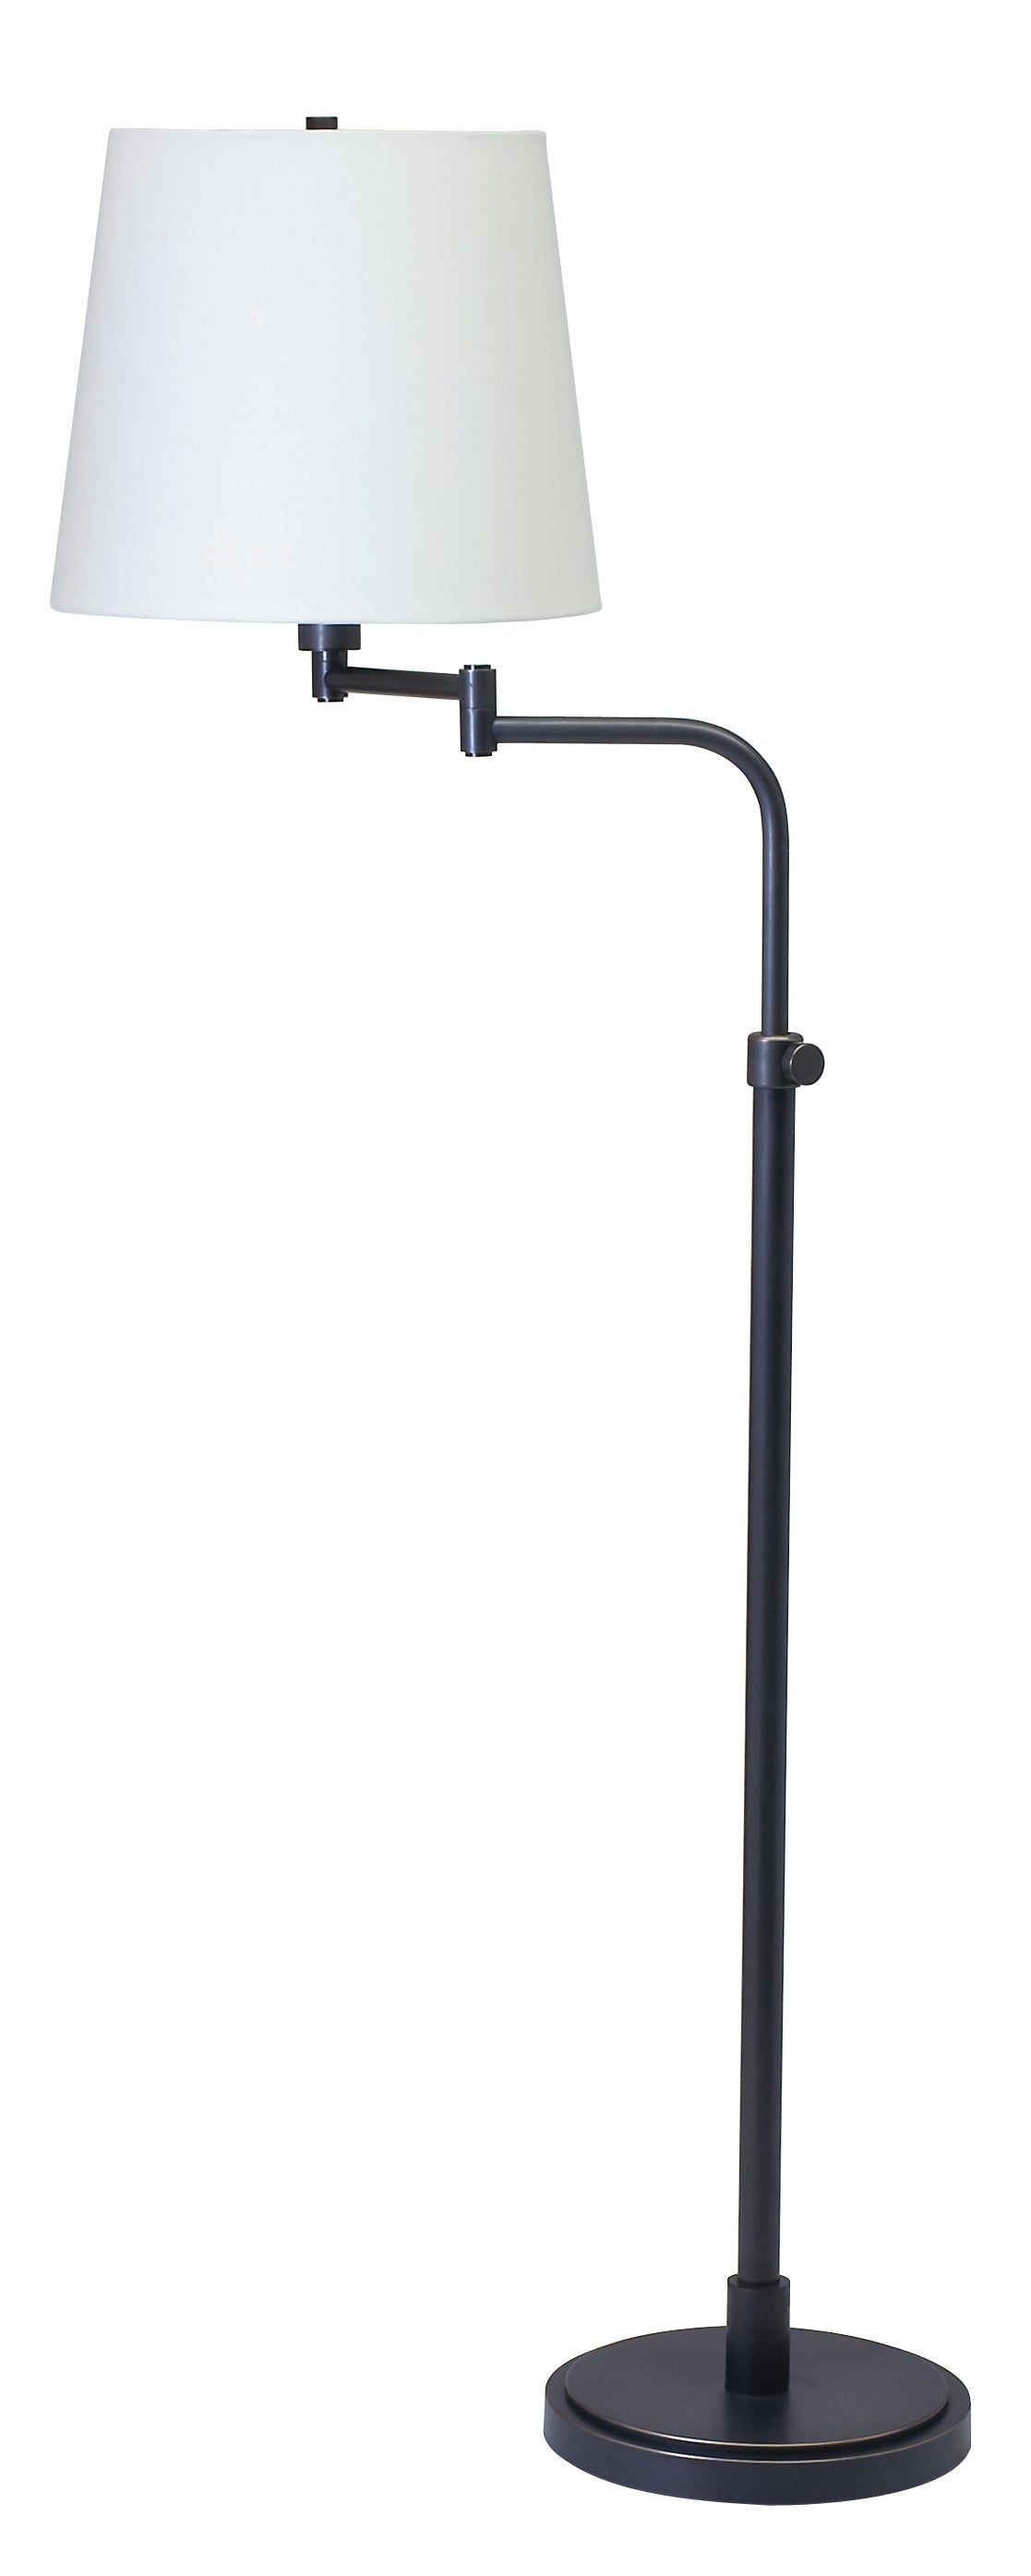 House of Troy Townhouse Adjustable Swing Arm Floor Lamp in Oil Rubbed Bronze TH700-OB